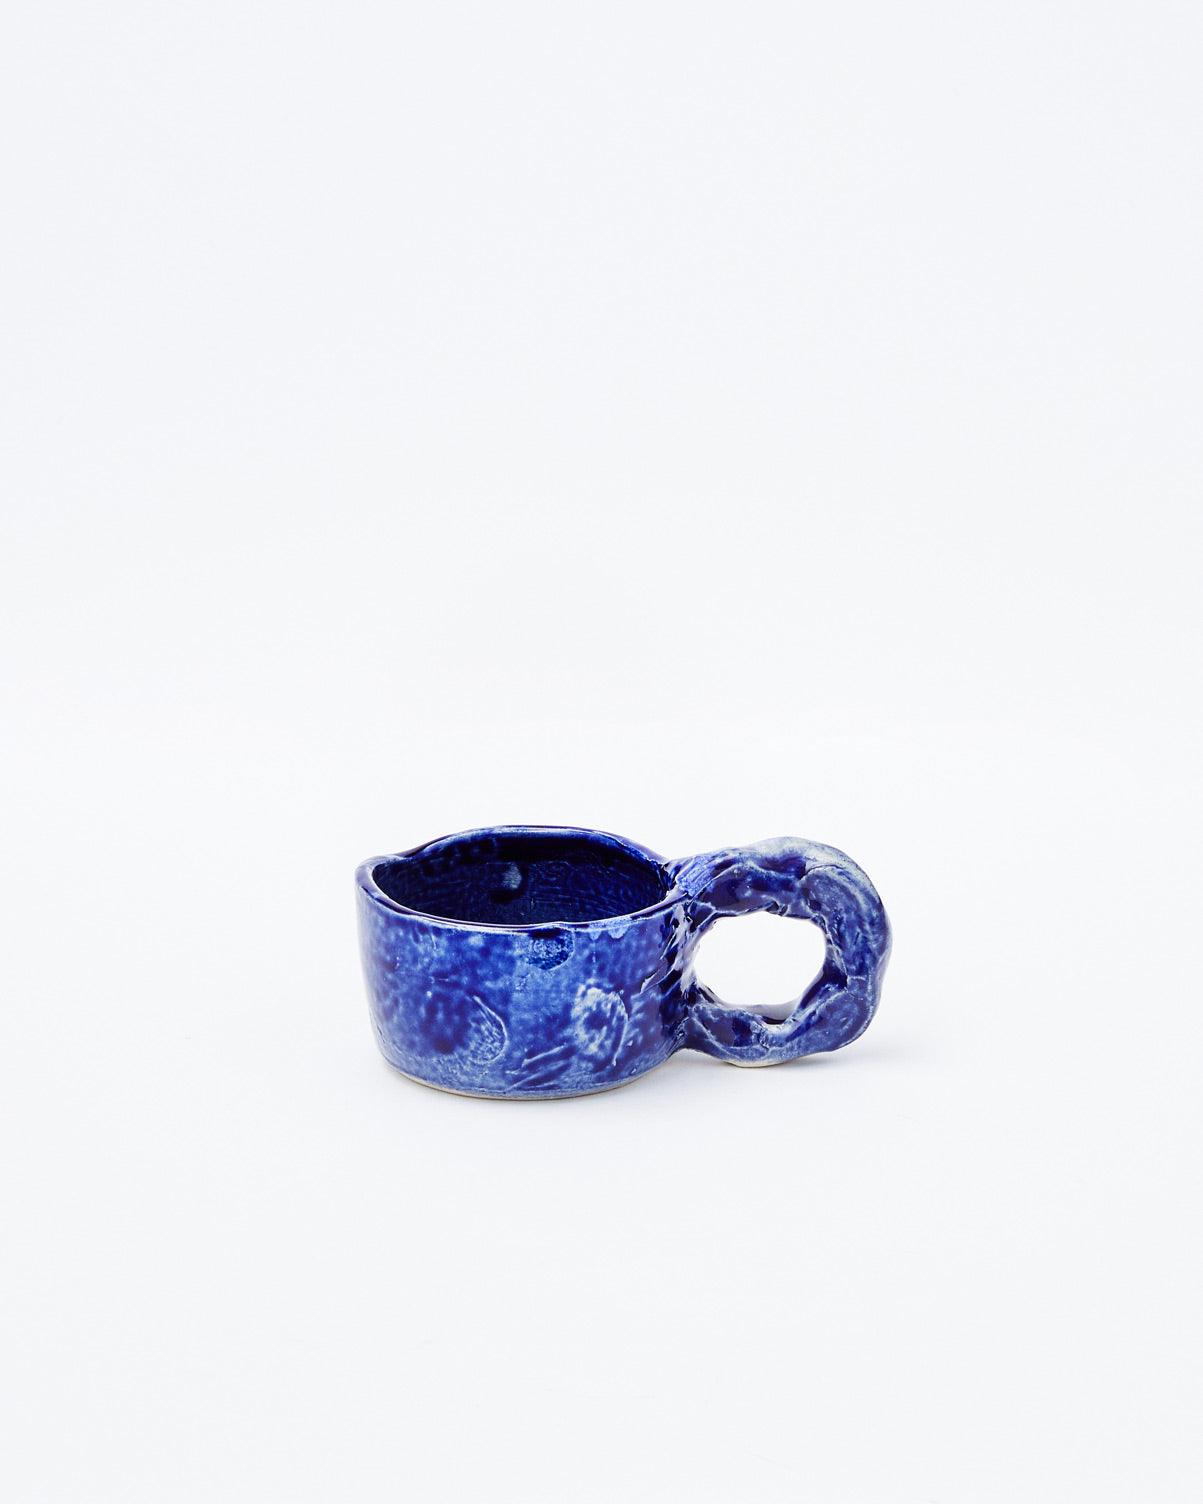 White background, dark blue modern ceramic cup with handle in right-hand position